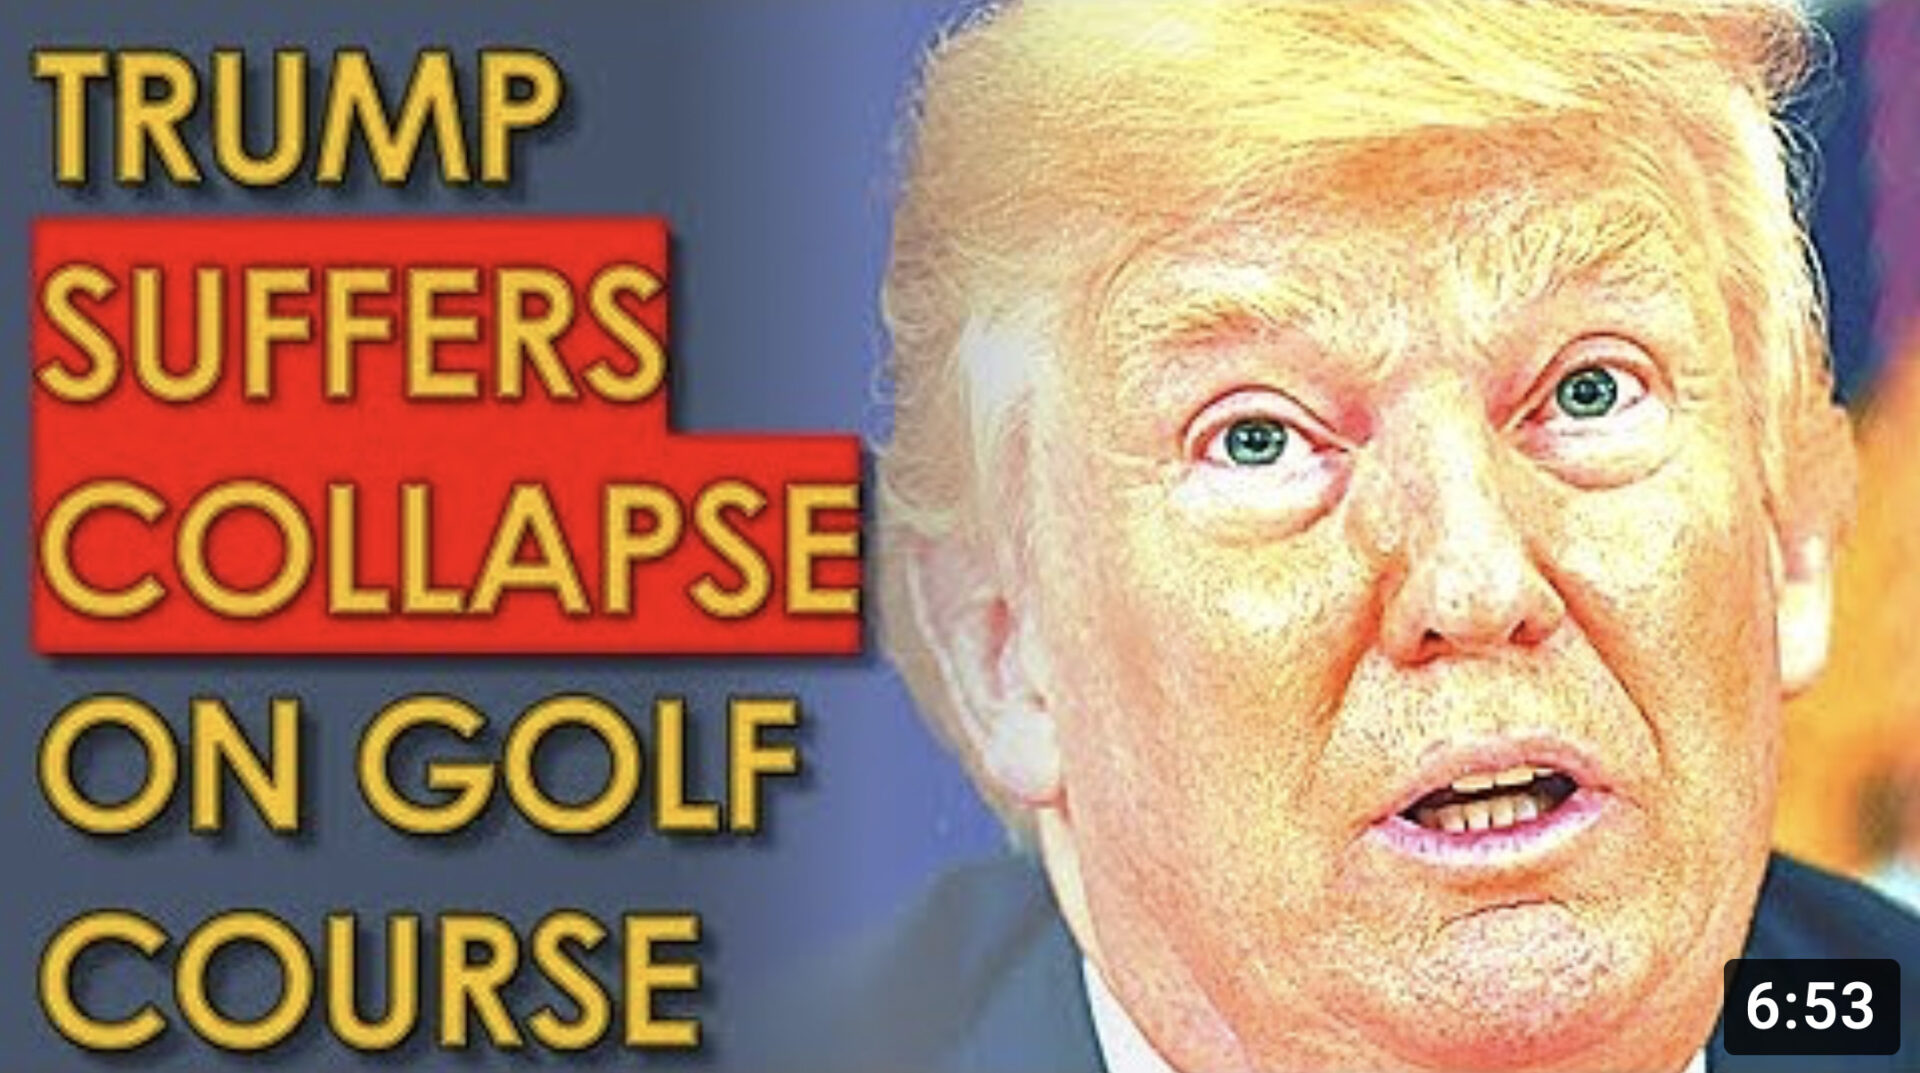 Trump SUFFERS COLLAPSE on his Golf Course